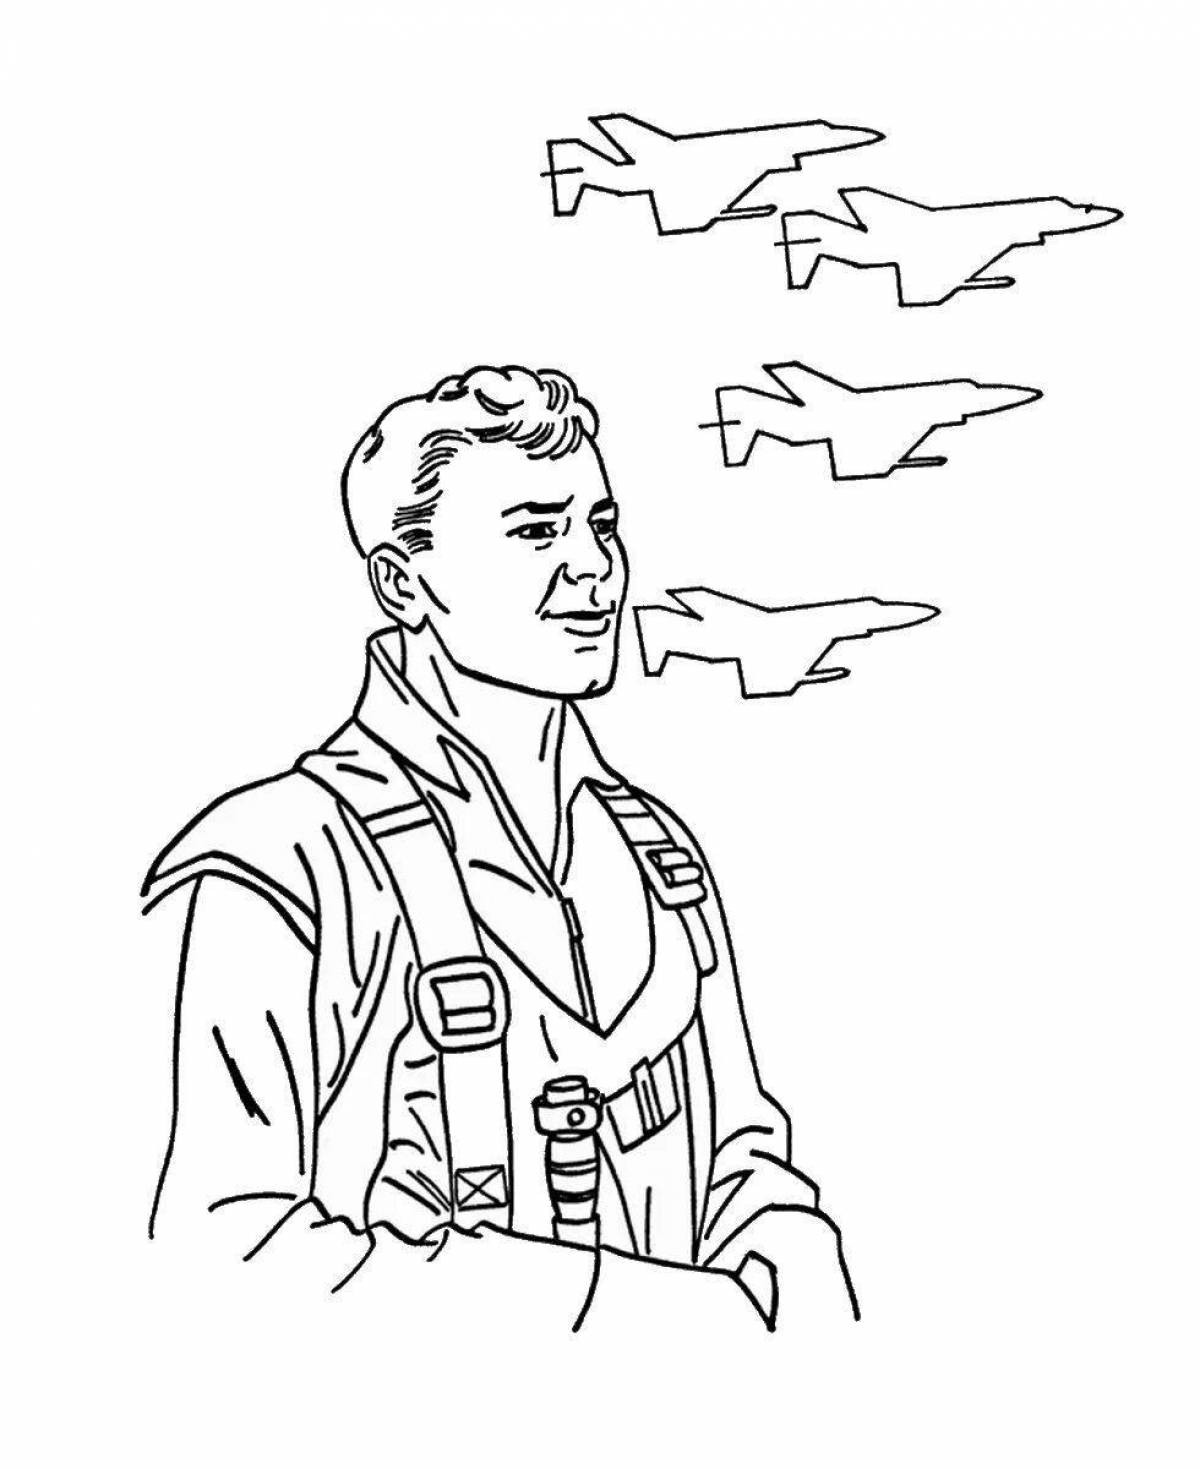 Colouring a cheerful military pilot for children